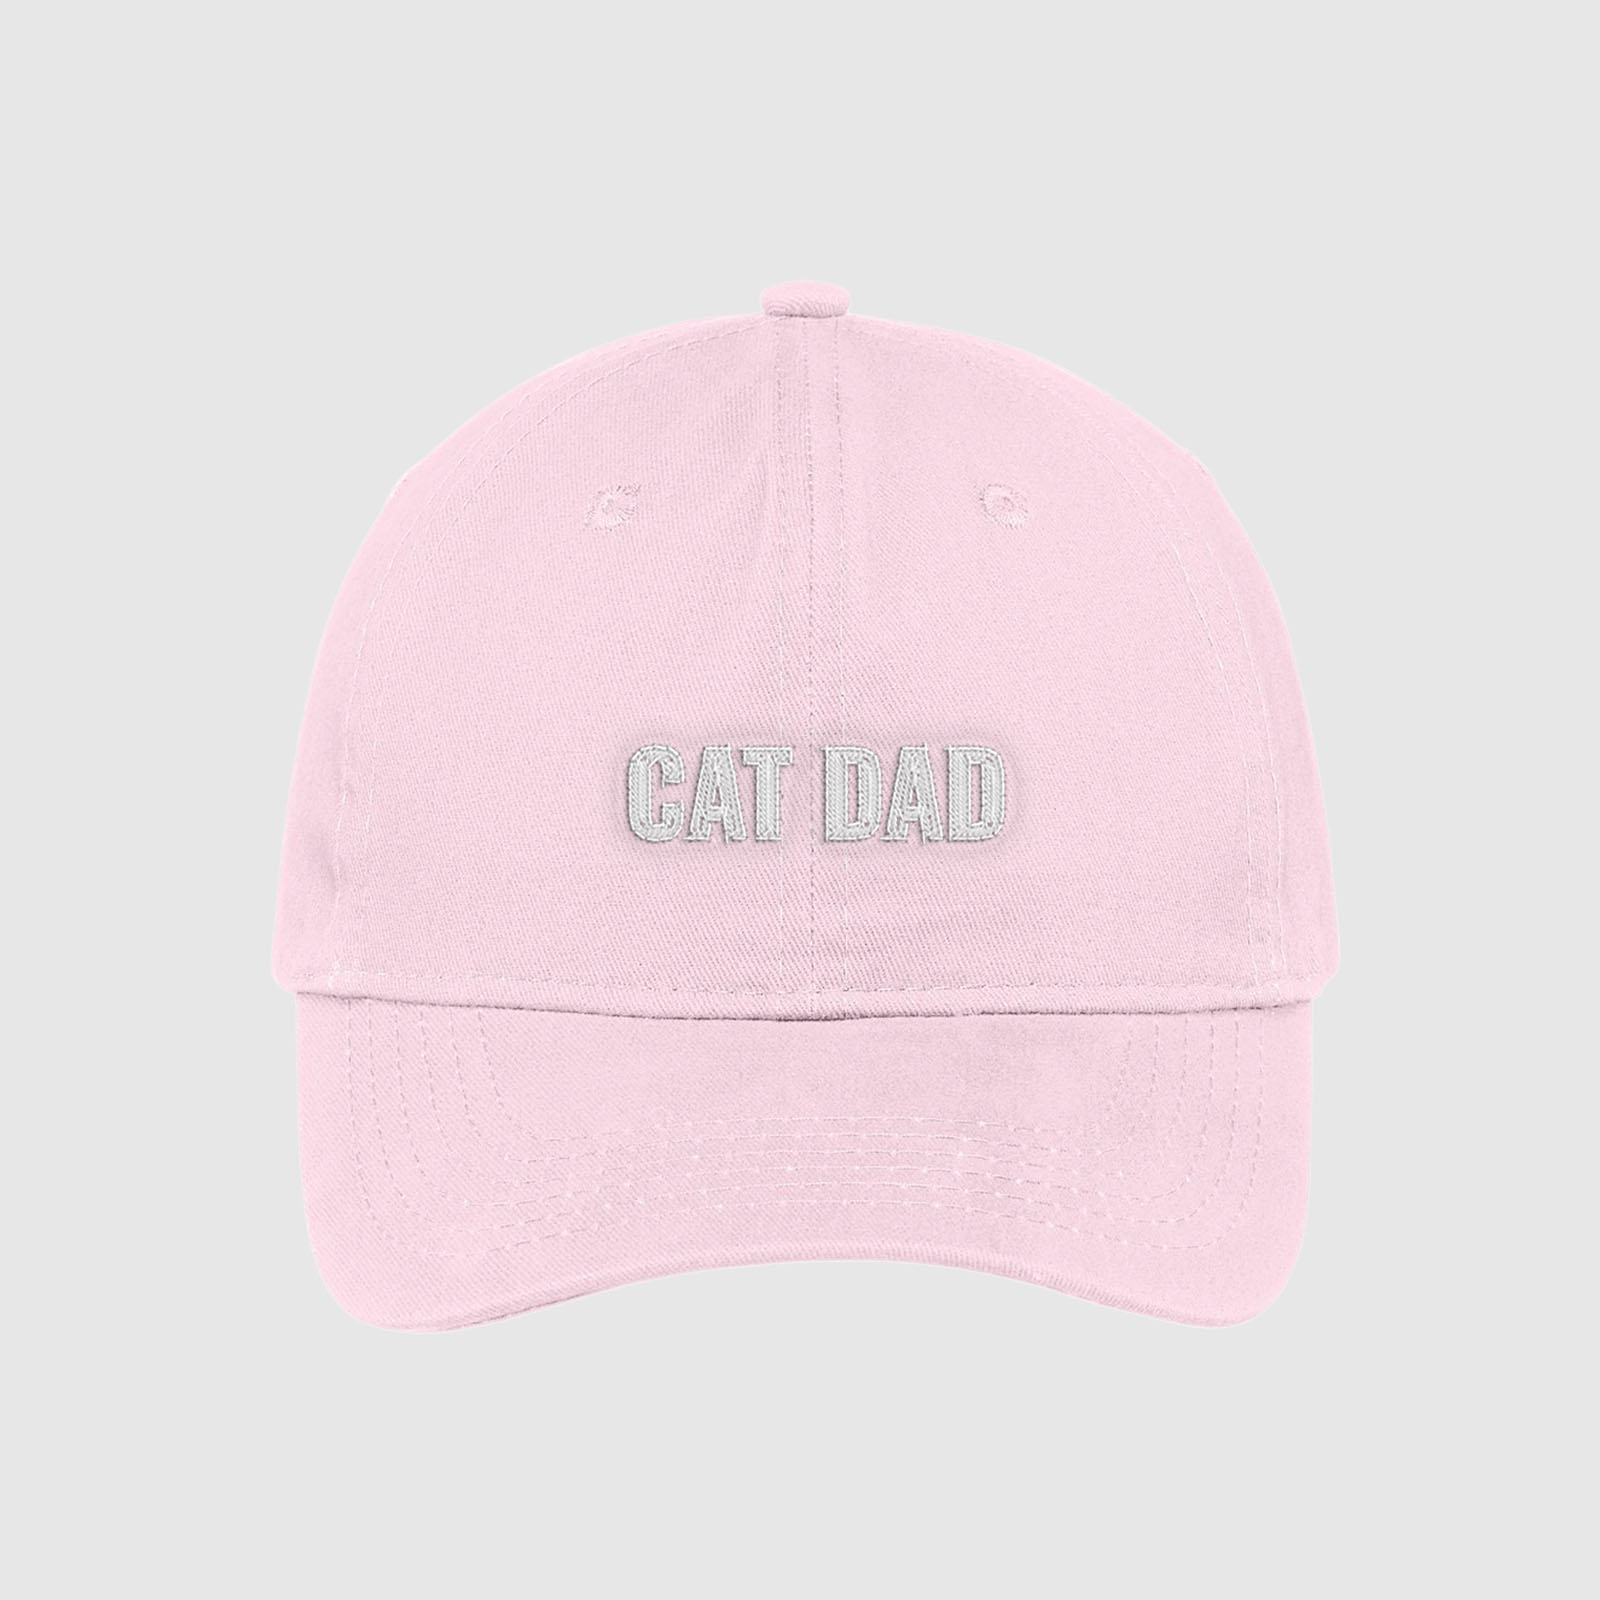 Blush pink pink cat dad hat embroidered with white text